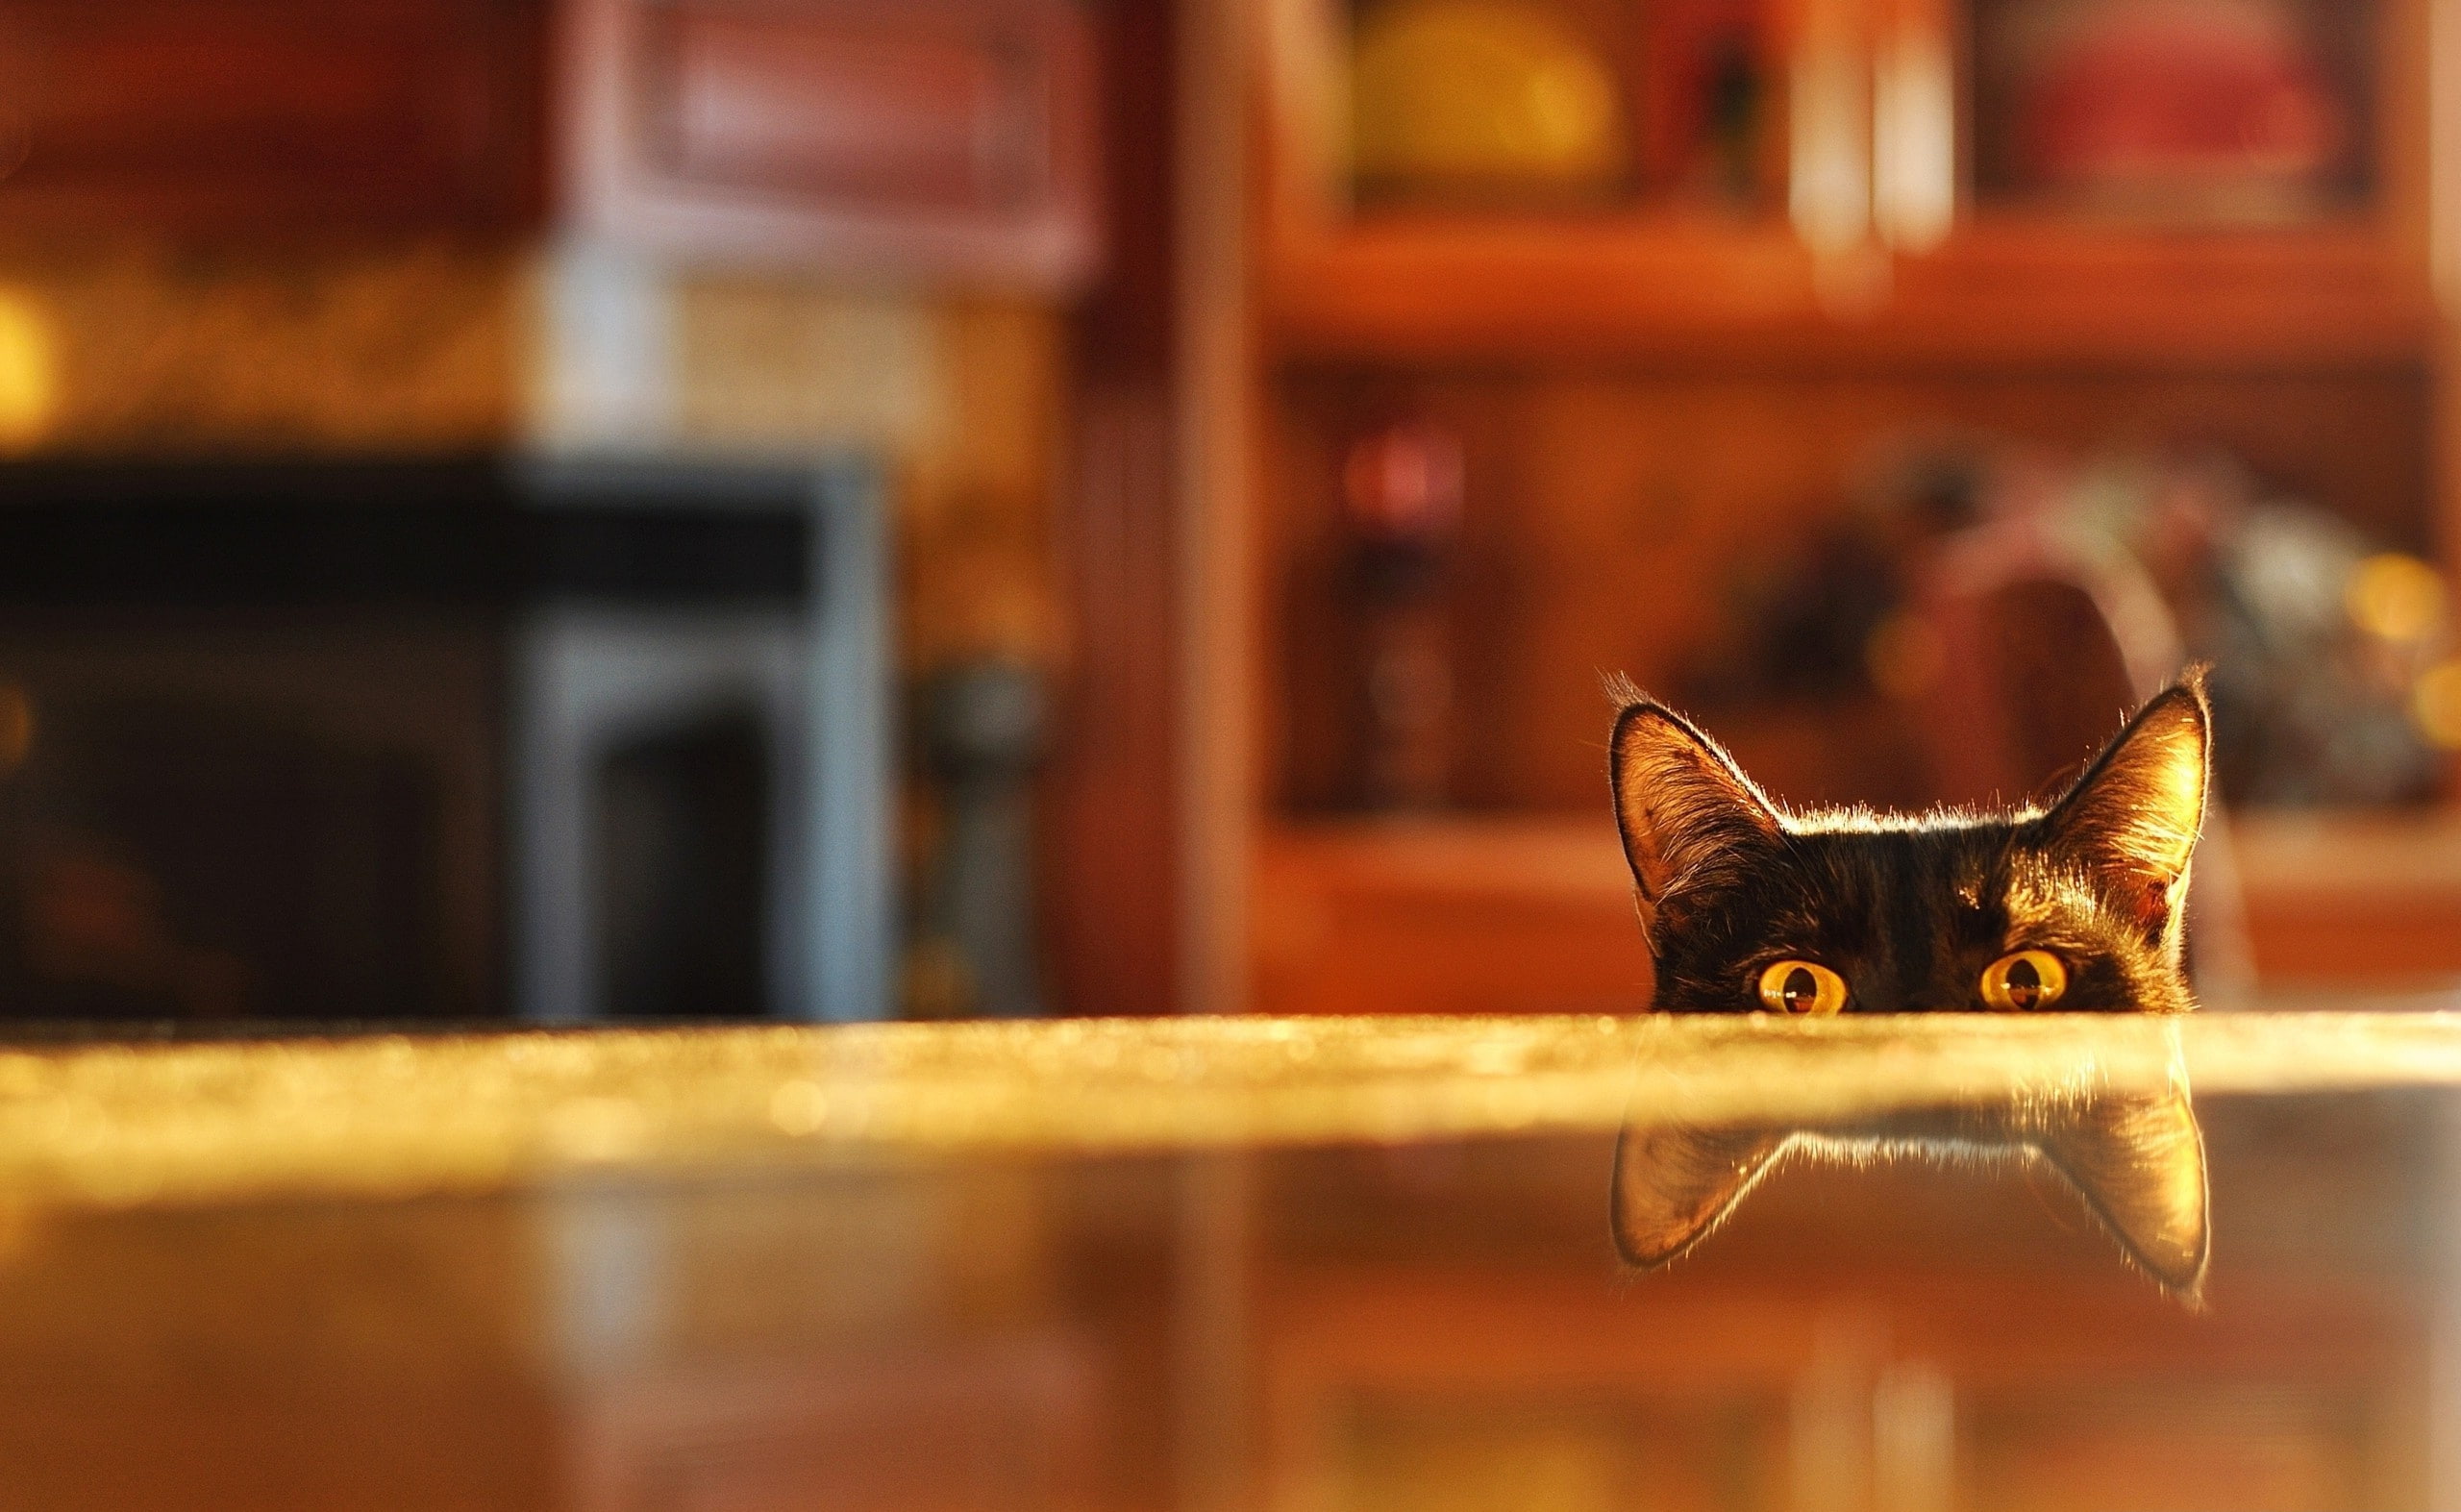 I Can See You, black cat, Funny, domestic cat, domestic animals